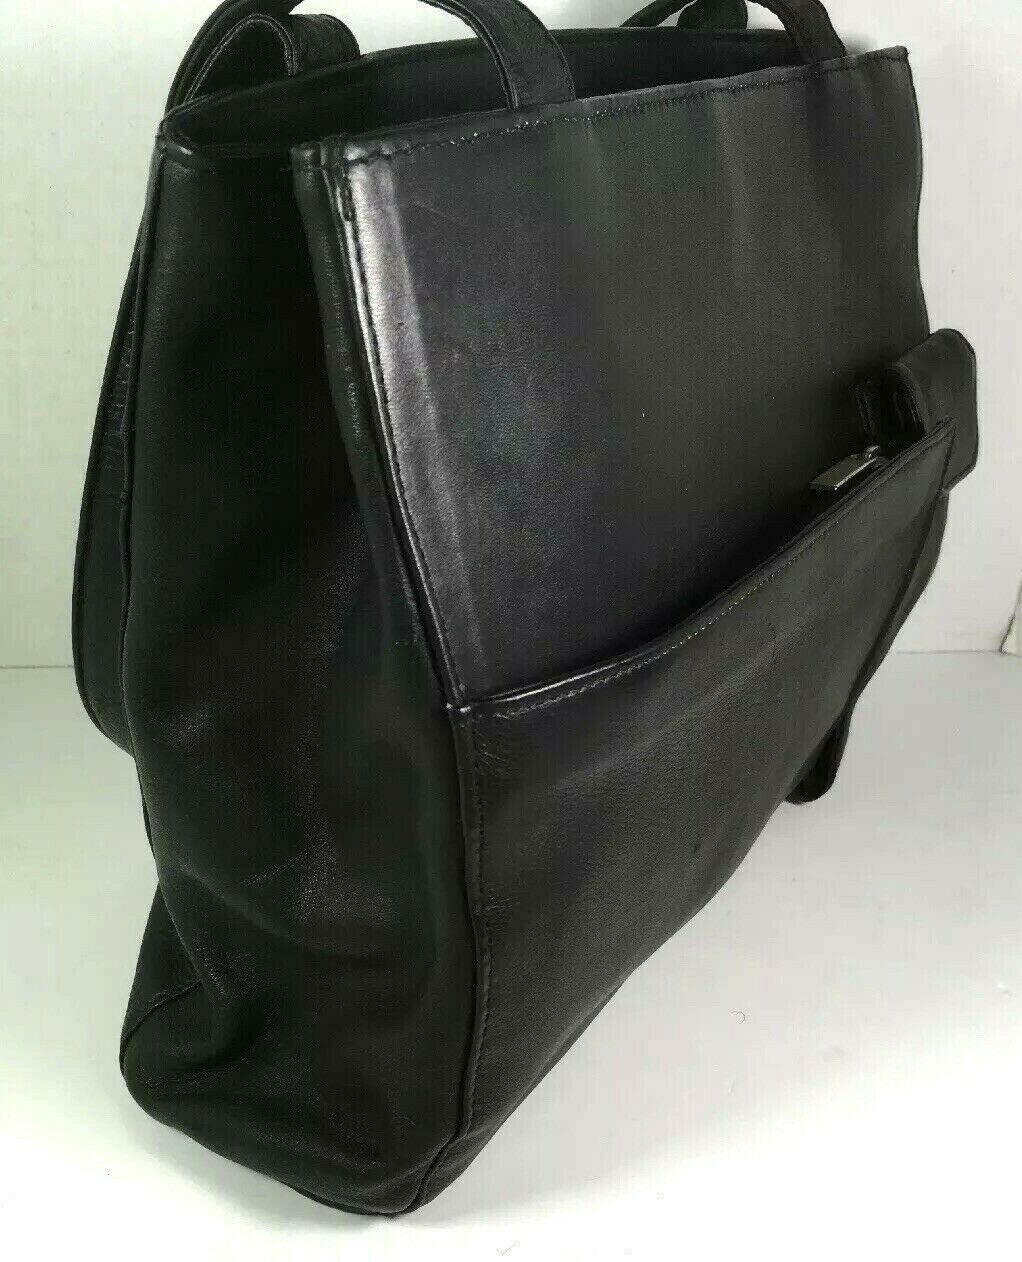 Black Leather Shoulder Bag With Compartments | IQS Executive